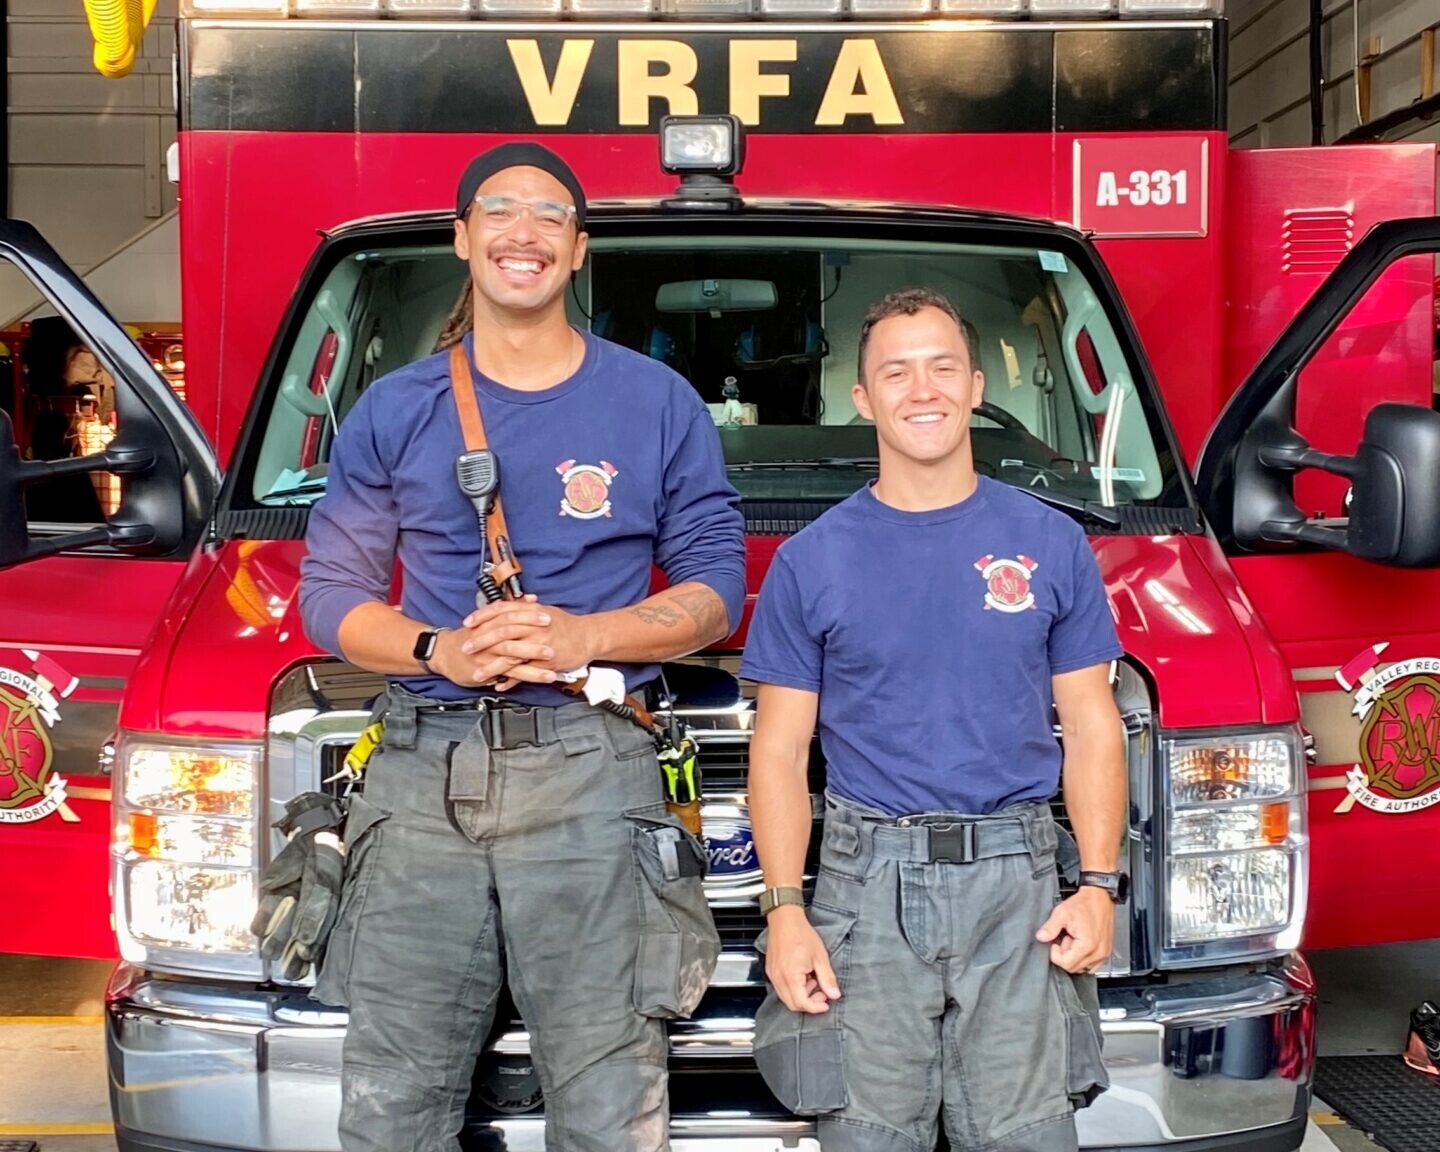 Two firefighters smiling in front of fire engine